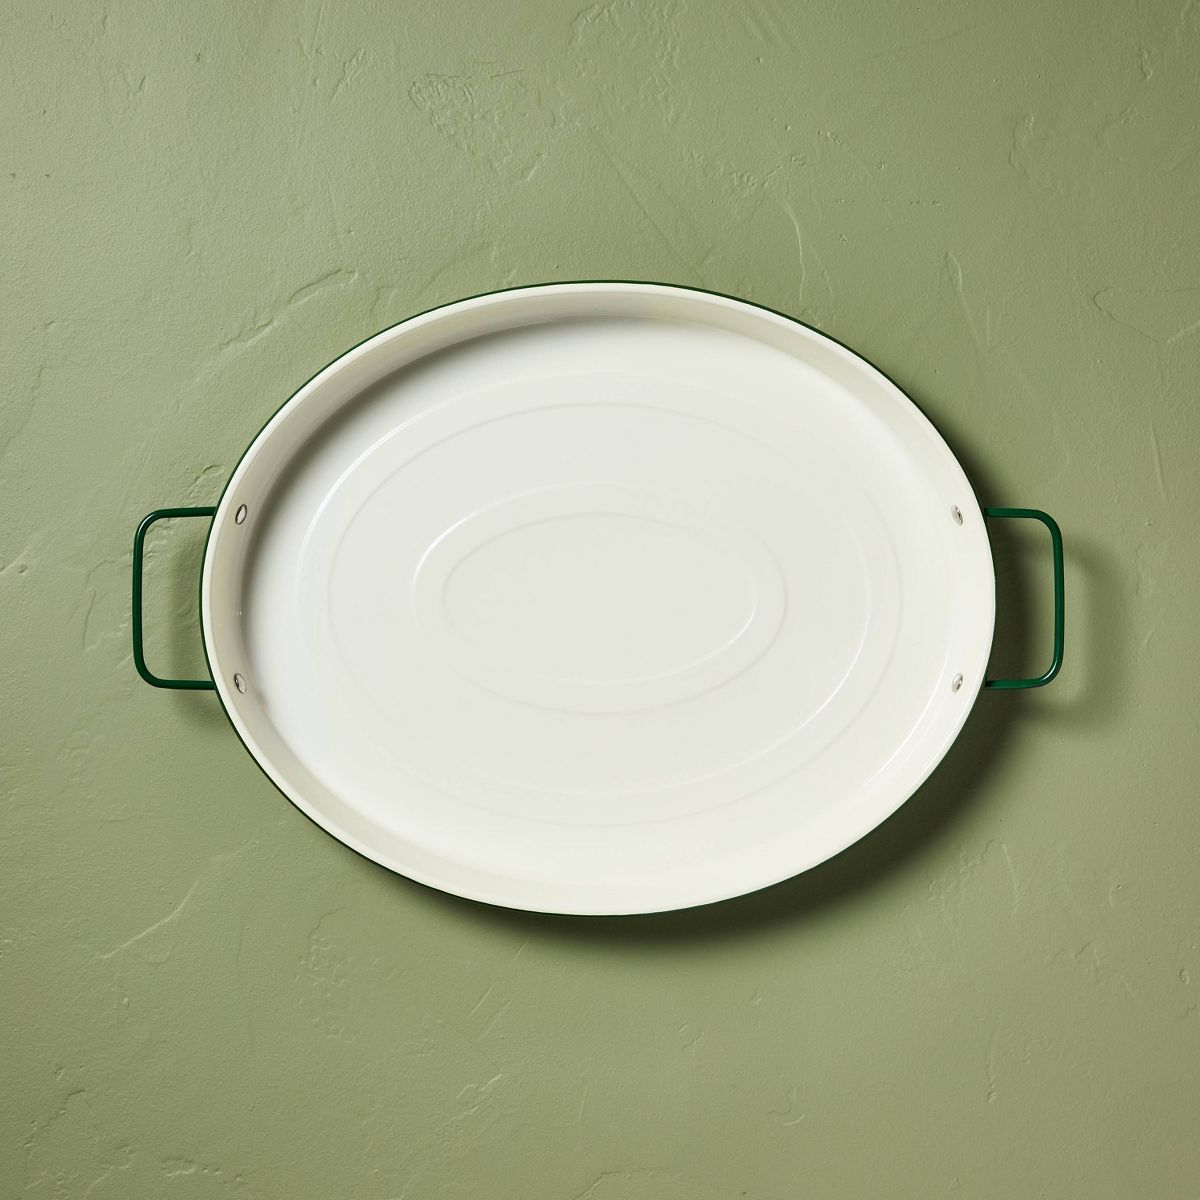 Enamel-Coated Metal Oval Serving Tray Cream/Green - Hearth & Hand™ with Magnolia | Target